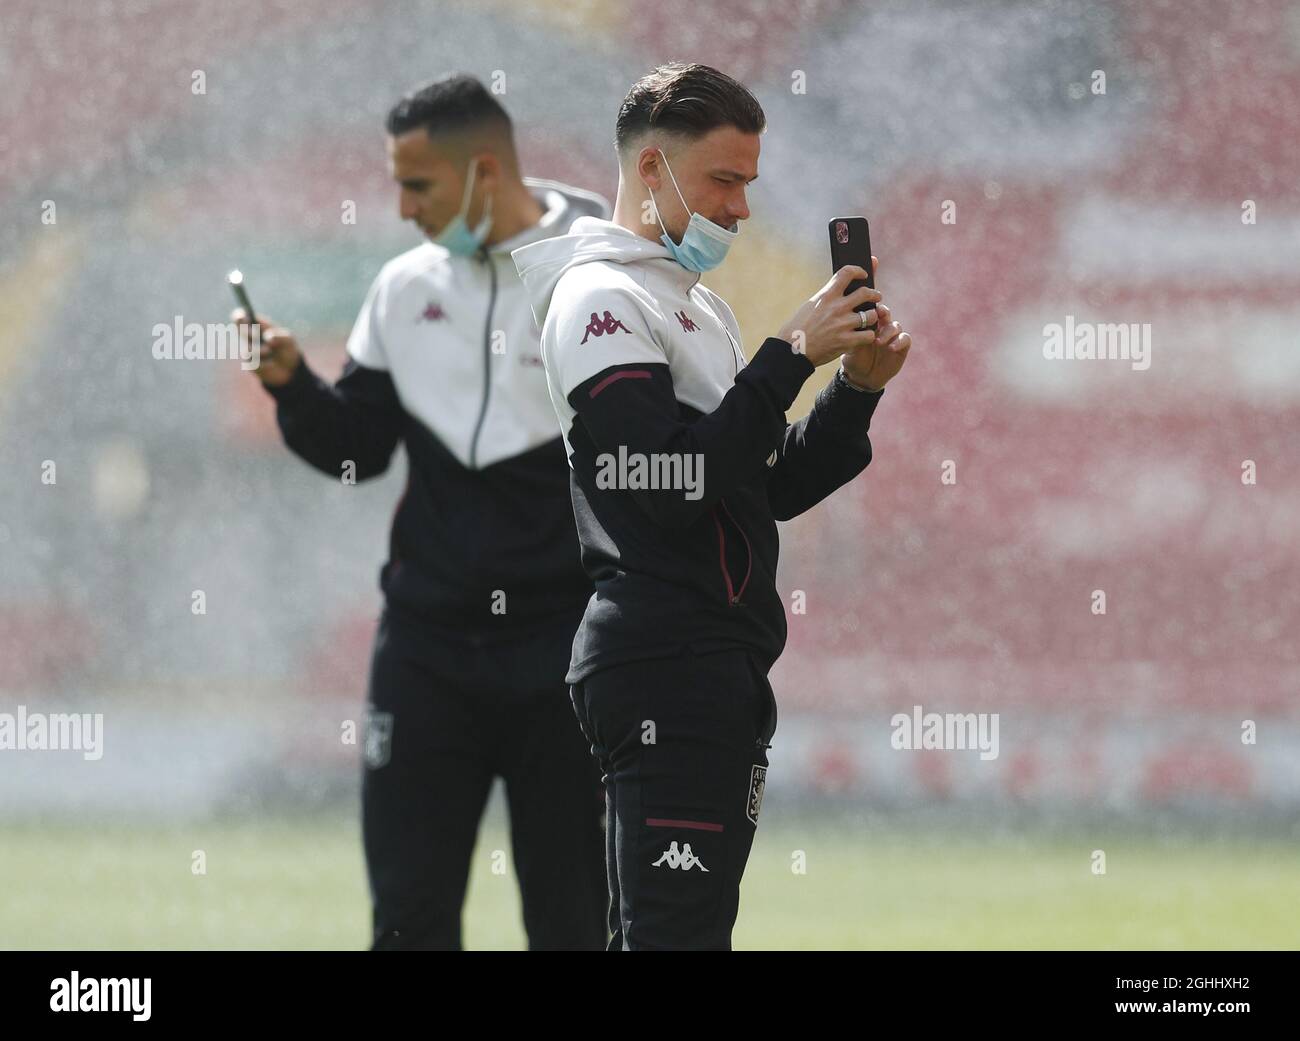 Liverpool, England, 10th April 2021. Matty Cash of Aston Villa takes pictures with his phone as he walks on the pitch before the Premier League match at Anfield, Liverpool. Picture credit should read: Darren Staples / Sportimage via PA Images Stock Photo